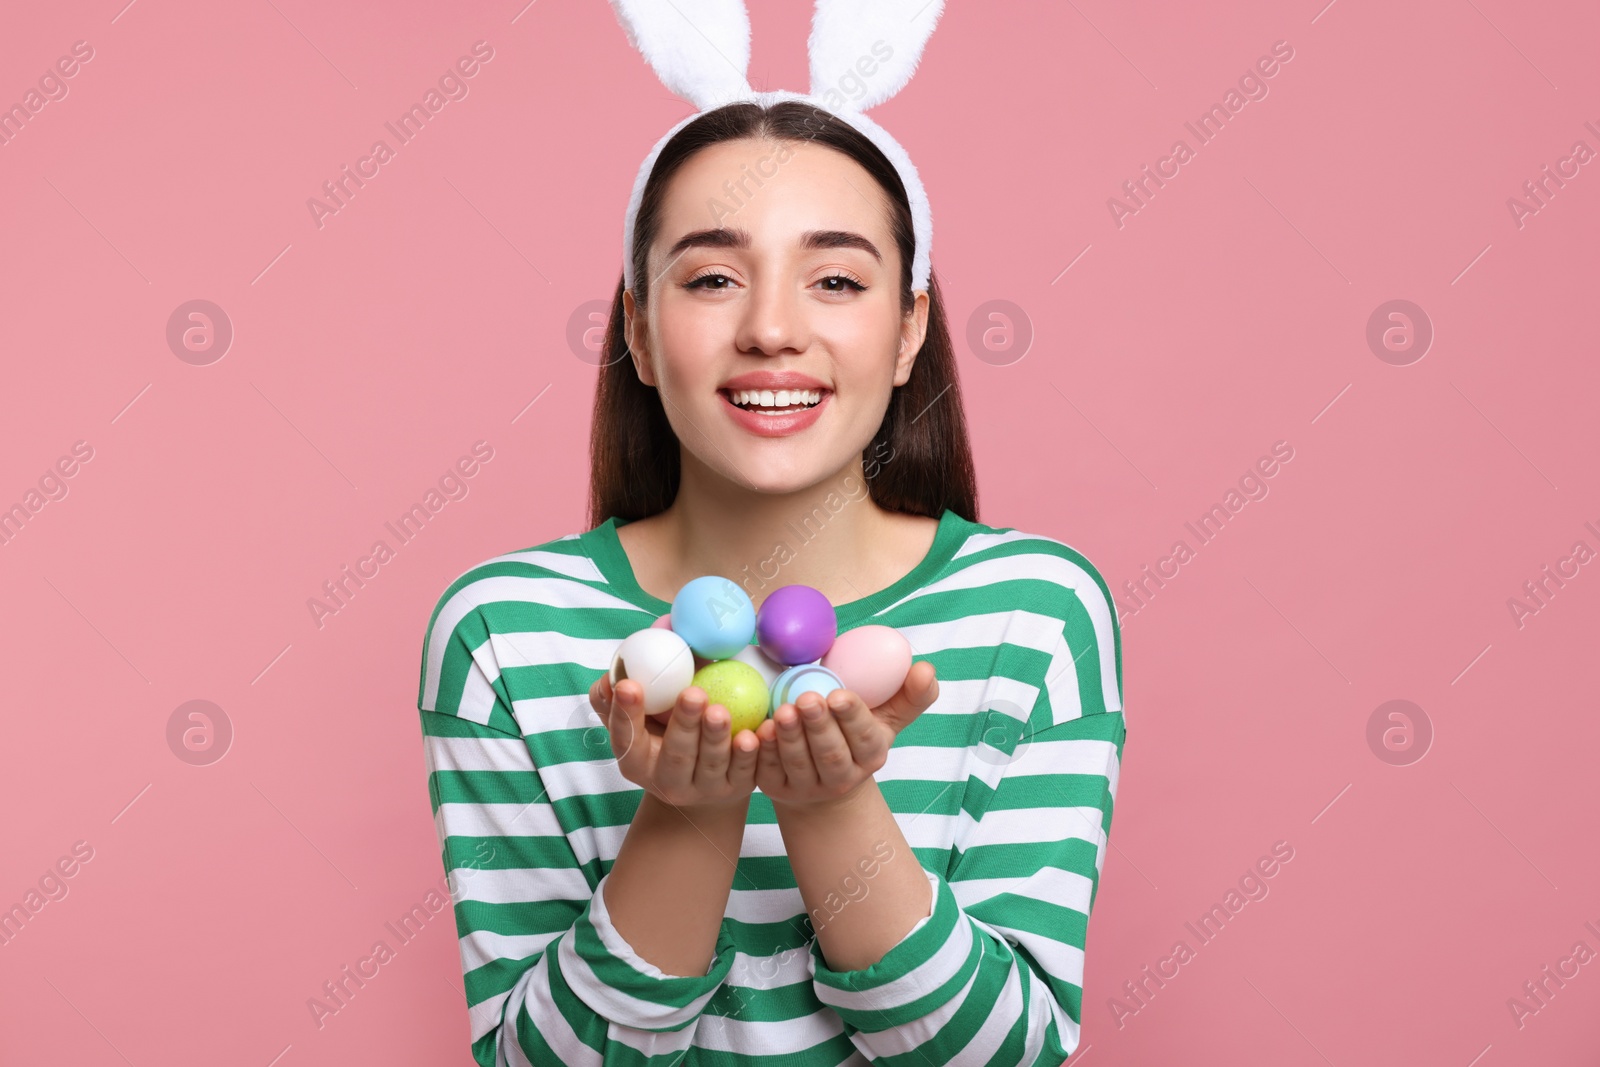 Photo of Happy woman in bunny ears headband holding painted Easter eggs on pink background